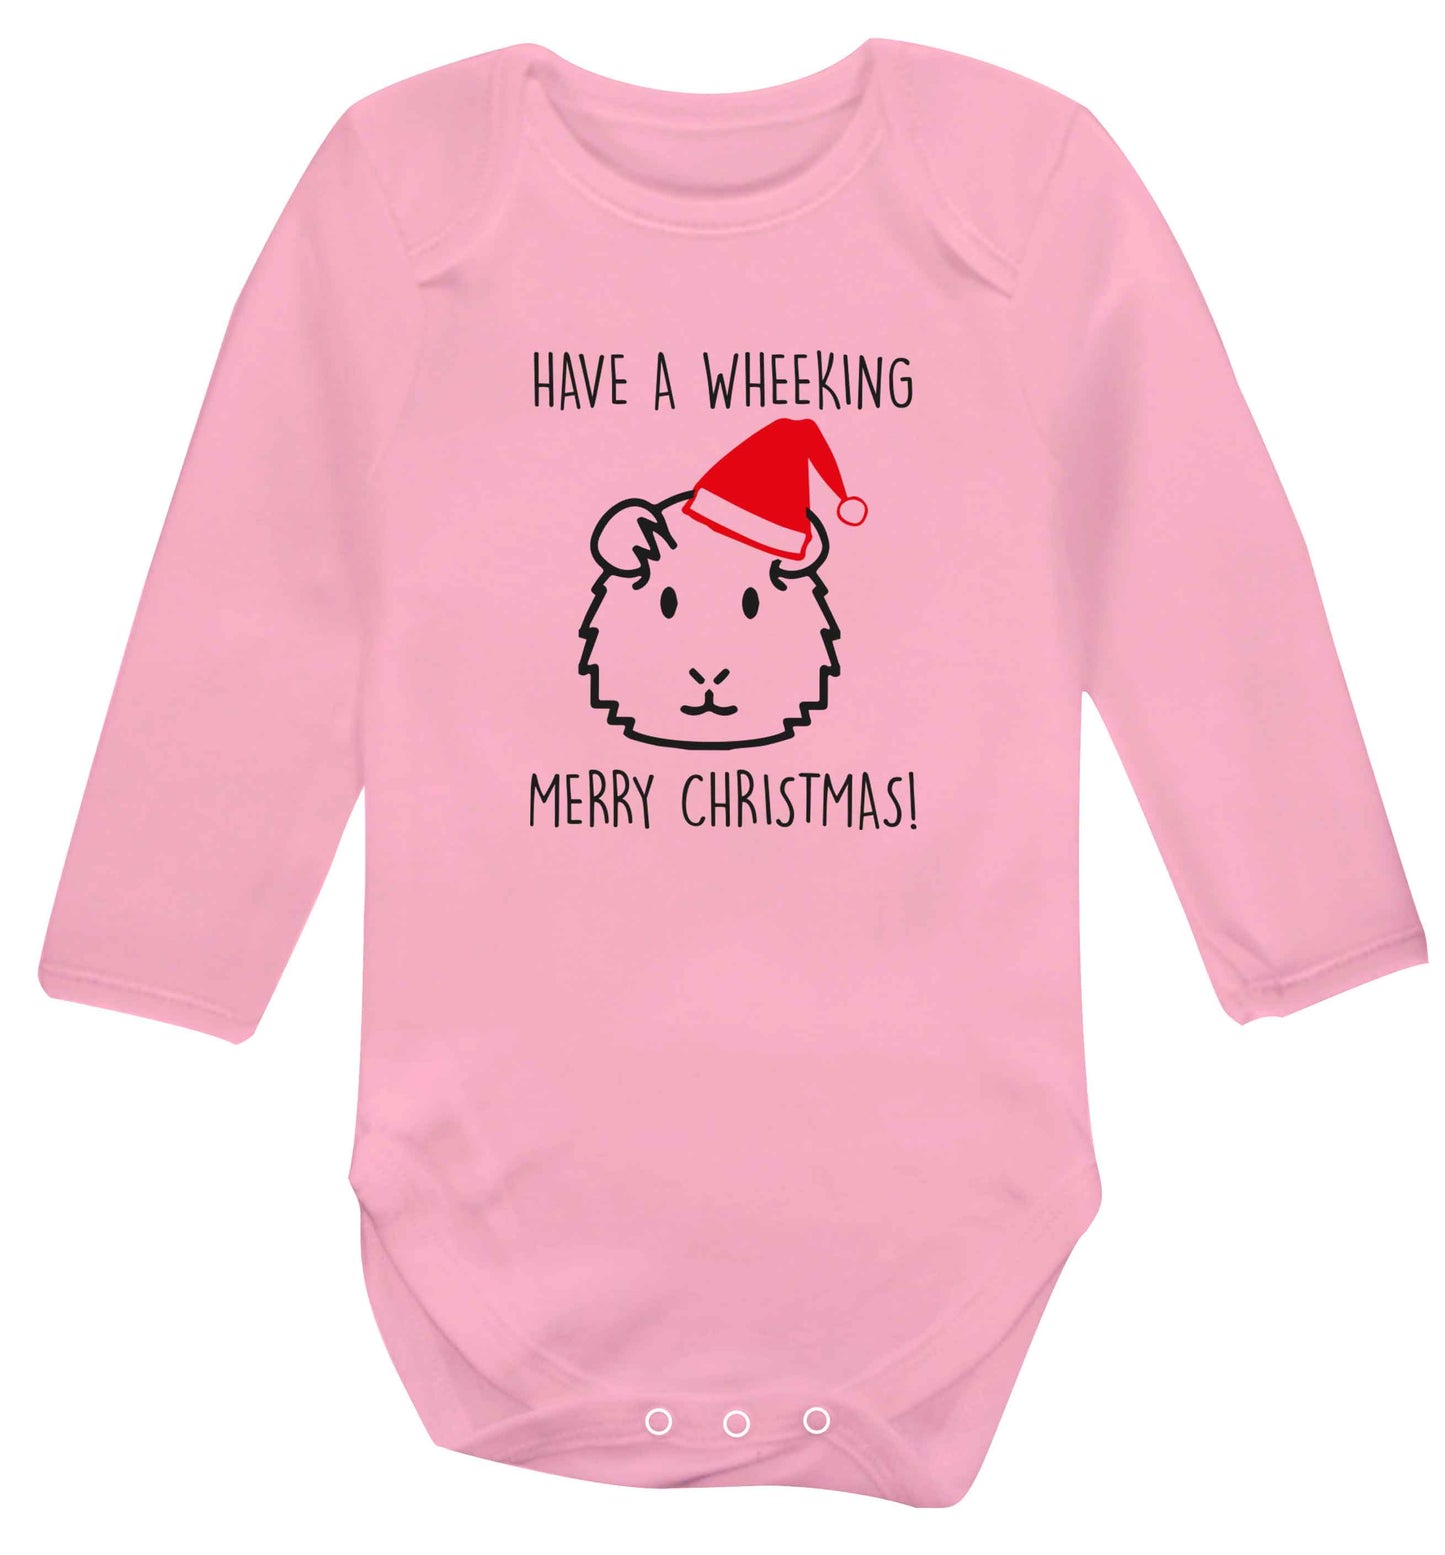 Have a wheeking merry Christmas baby vest long sleeved pale pink 6-12 months